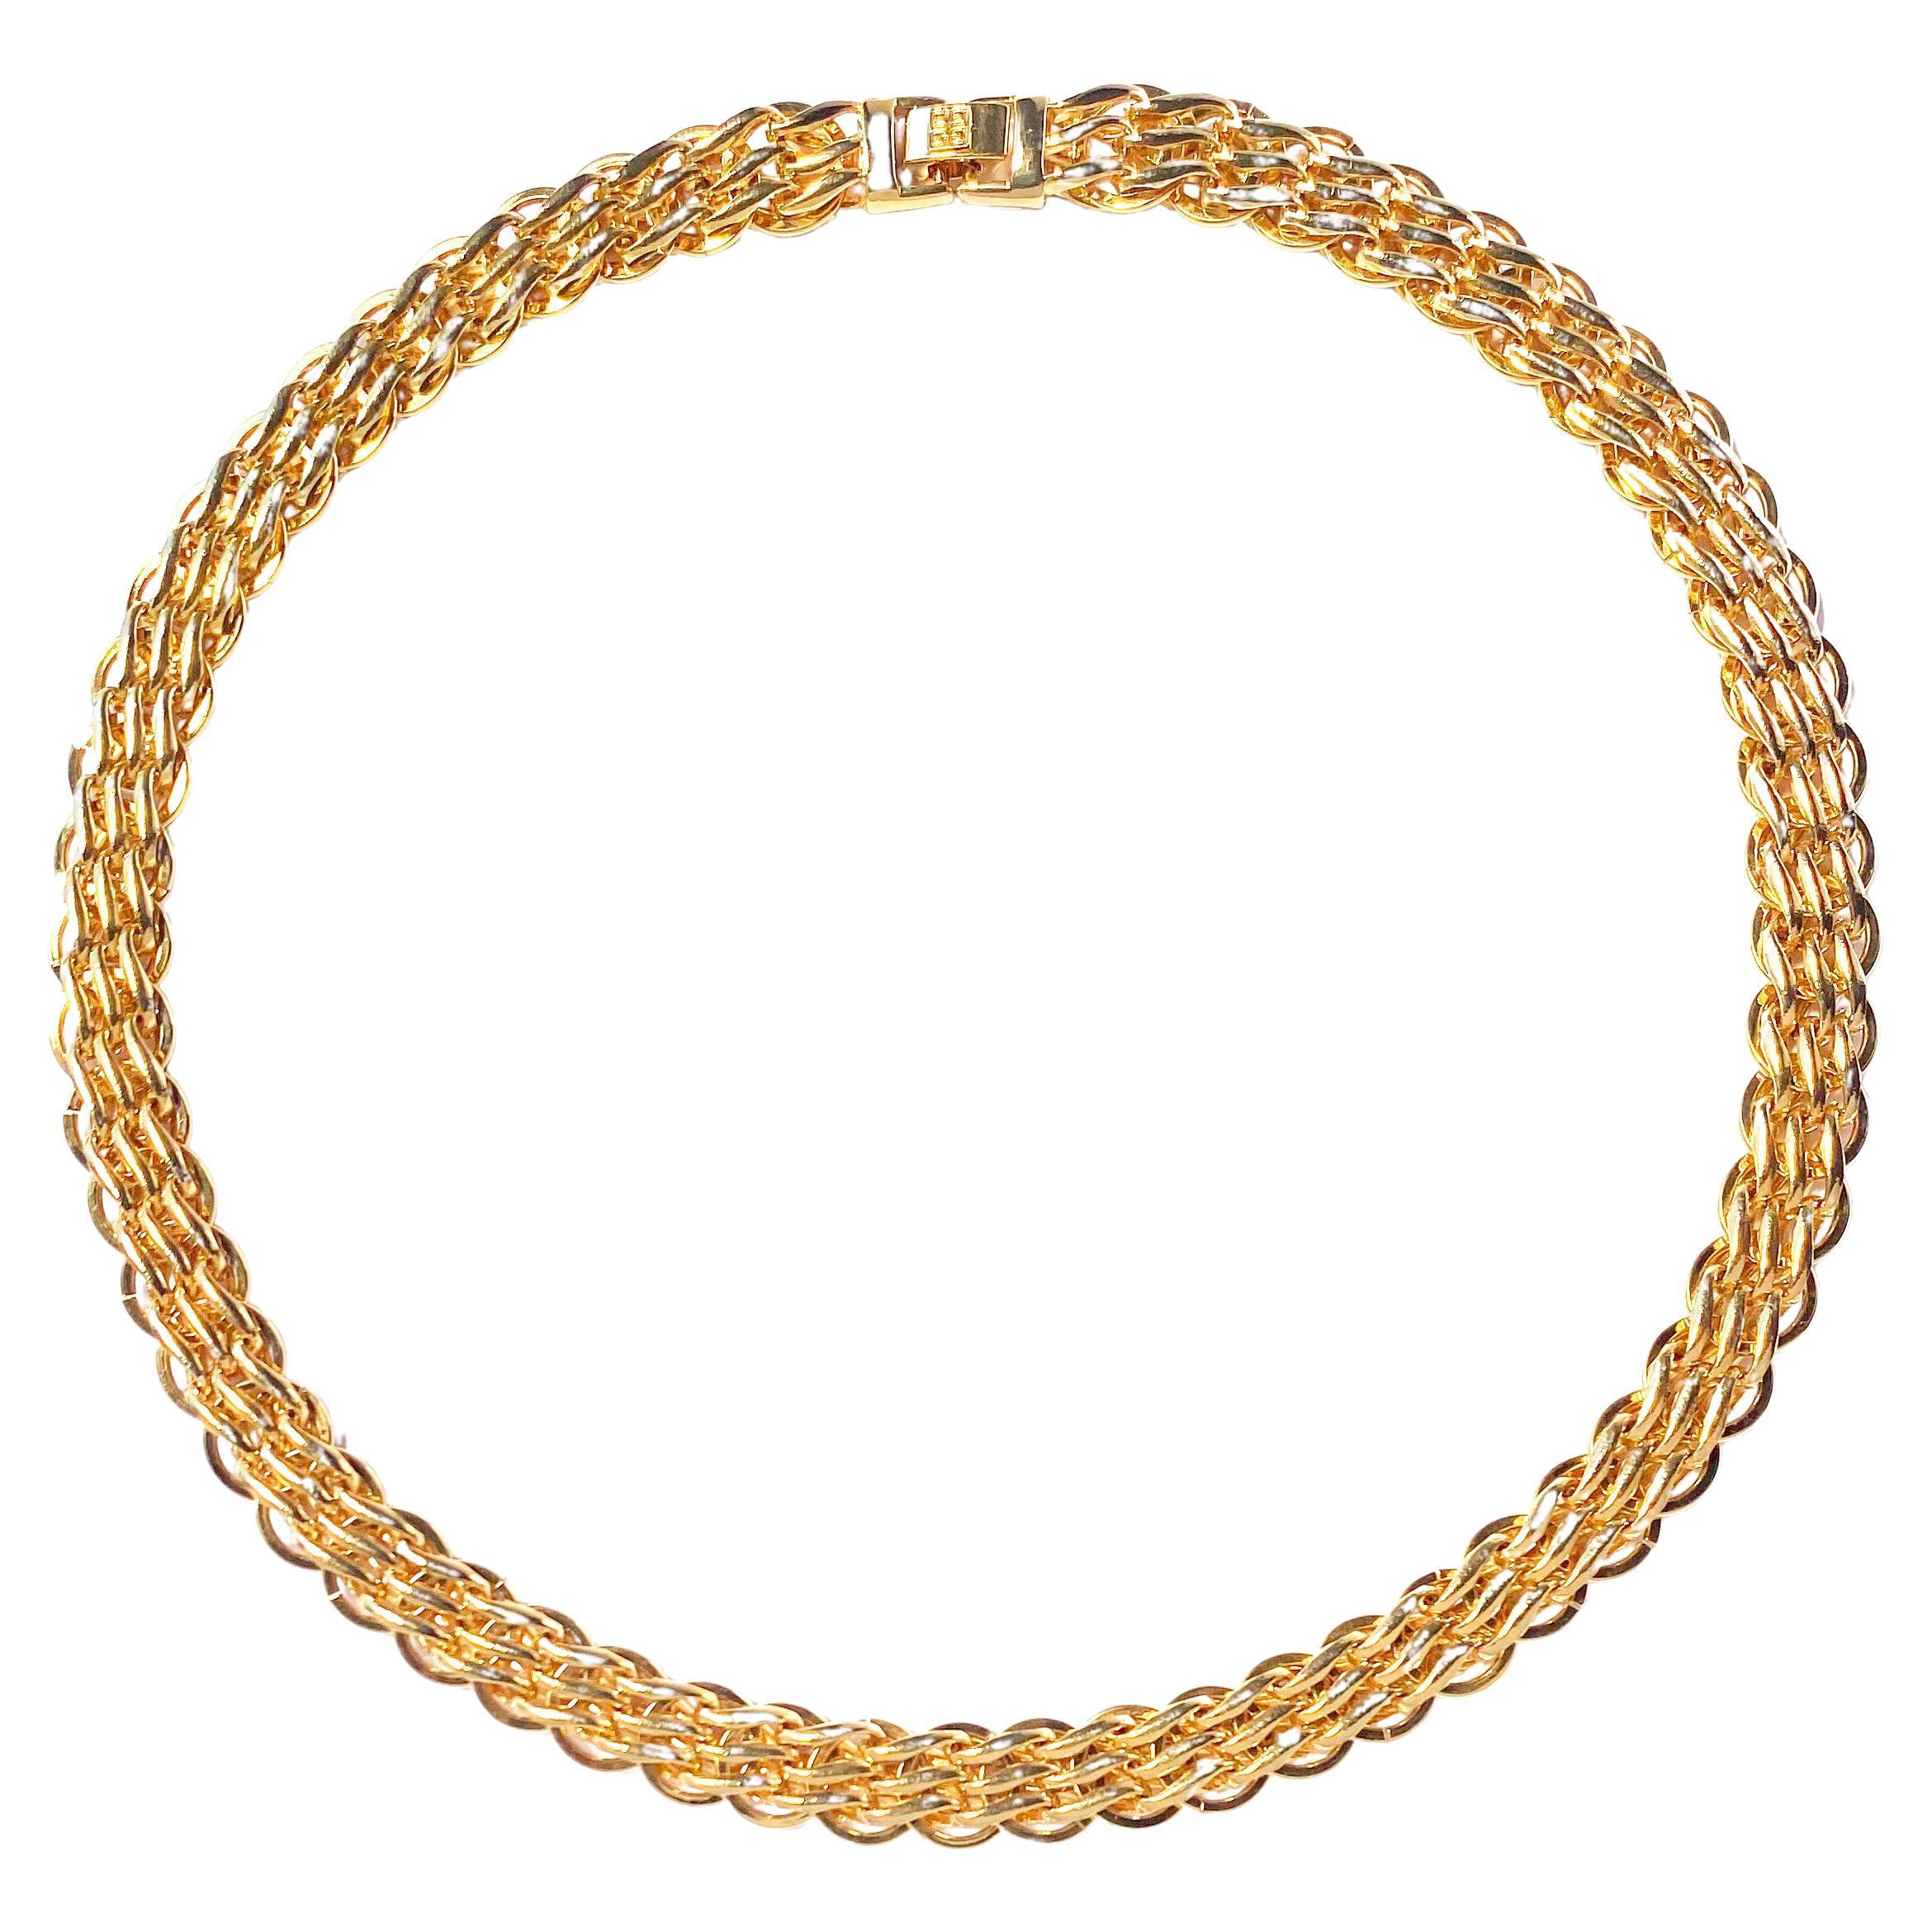 Vintage Givenchy Triple Link Chain Necklace with Logo Clasp, 1980s